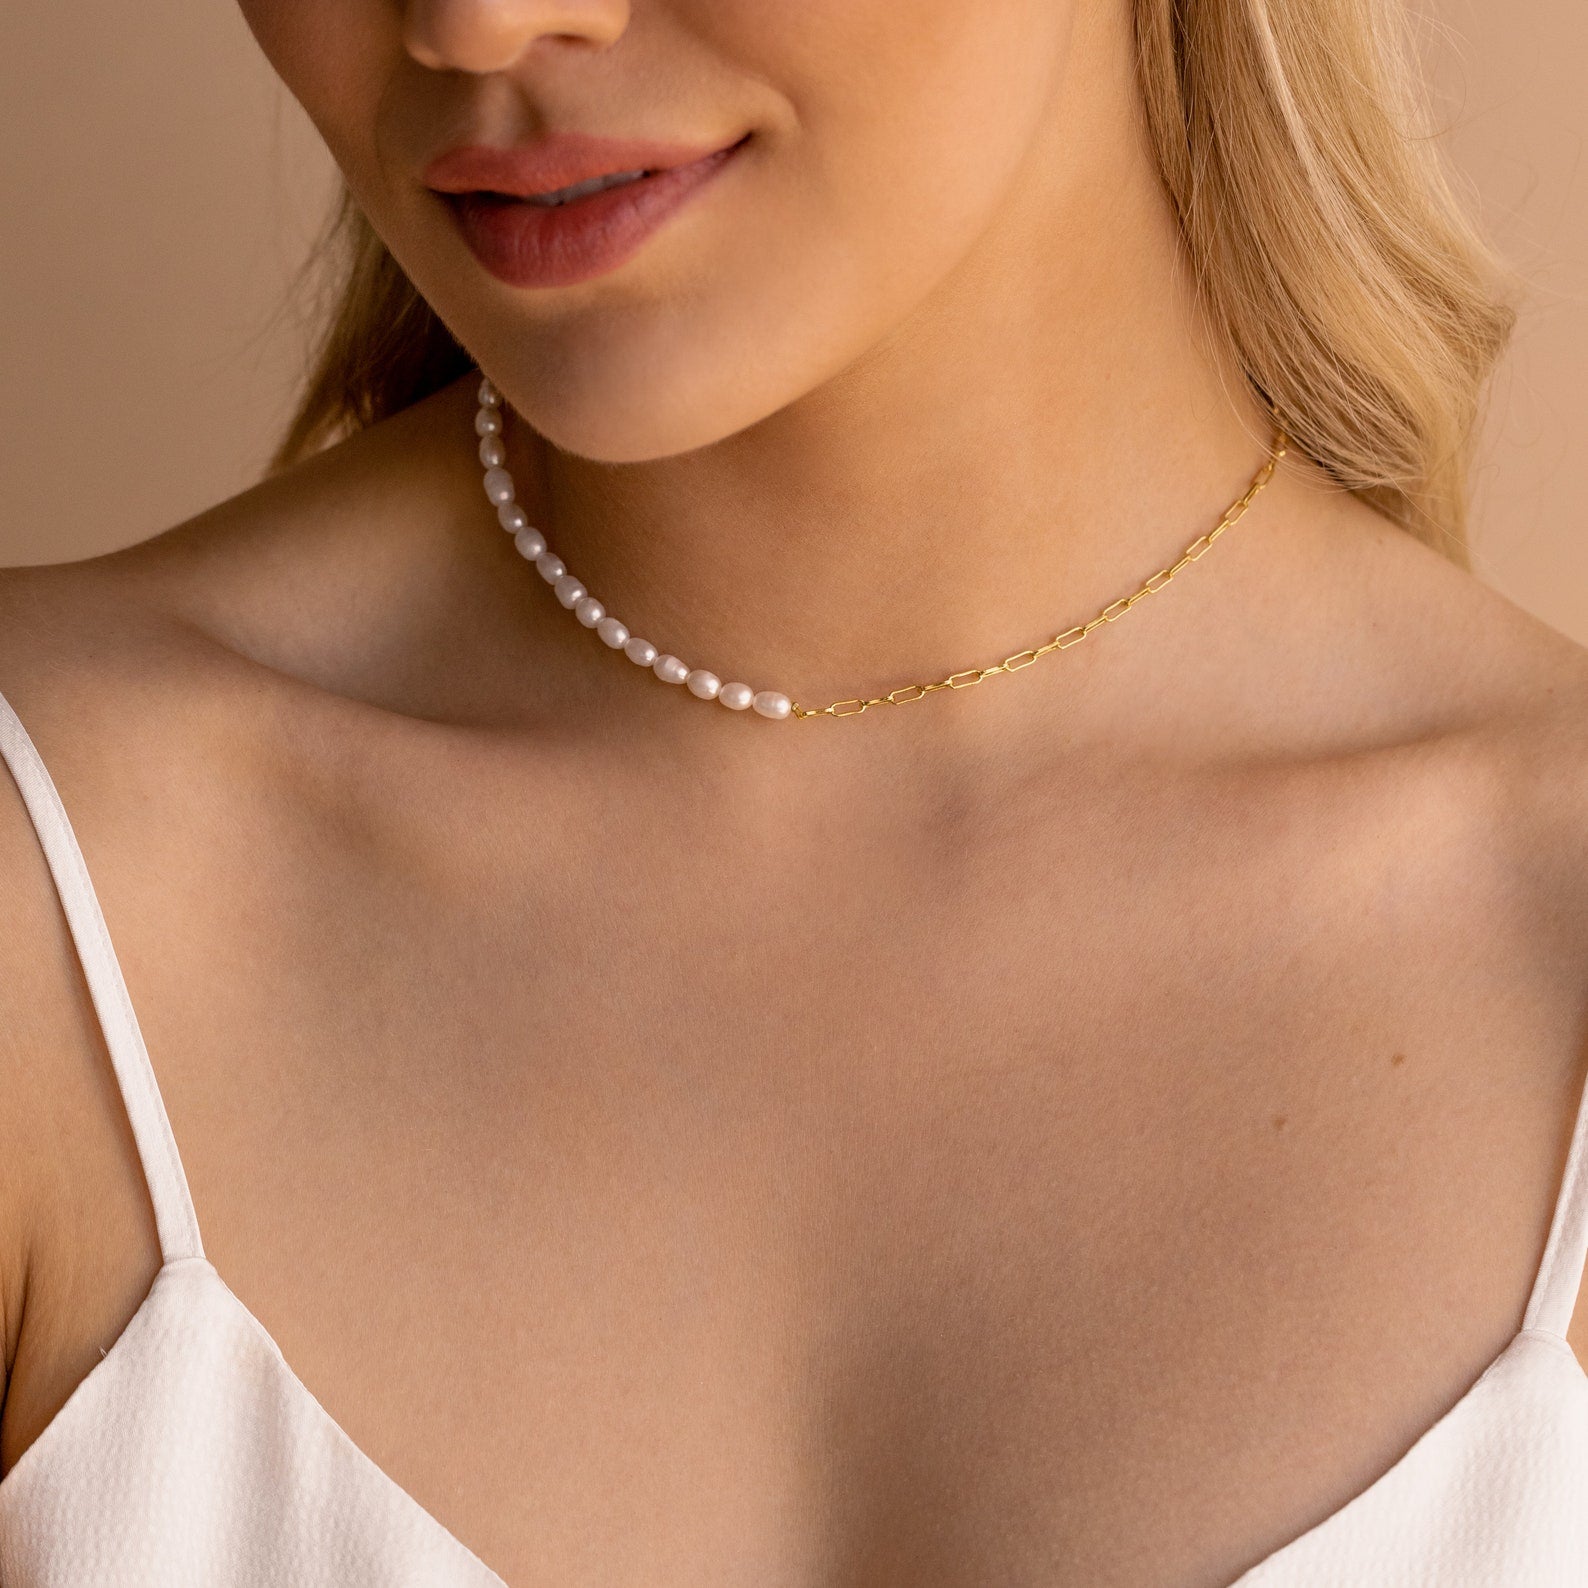 Stunning Gold Plated Pearl Golden Chain Necklace 26 inches - Fashion Frill